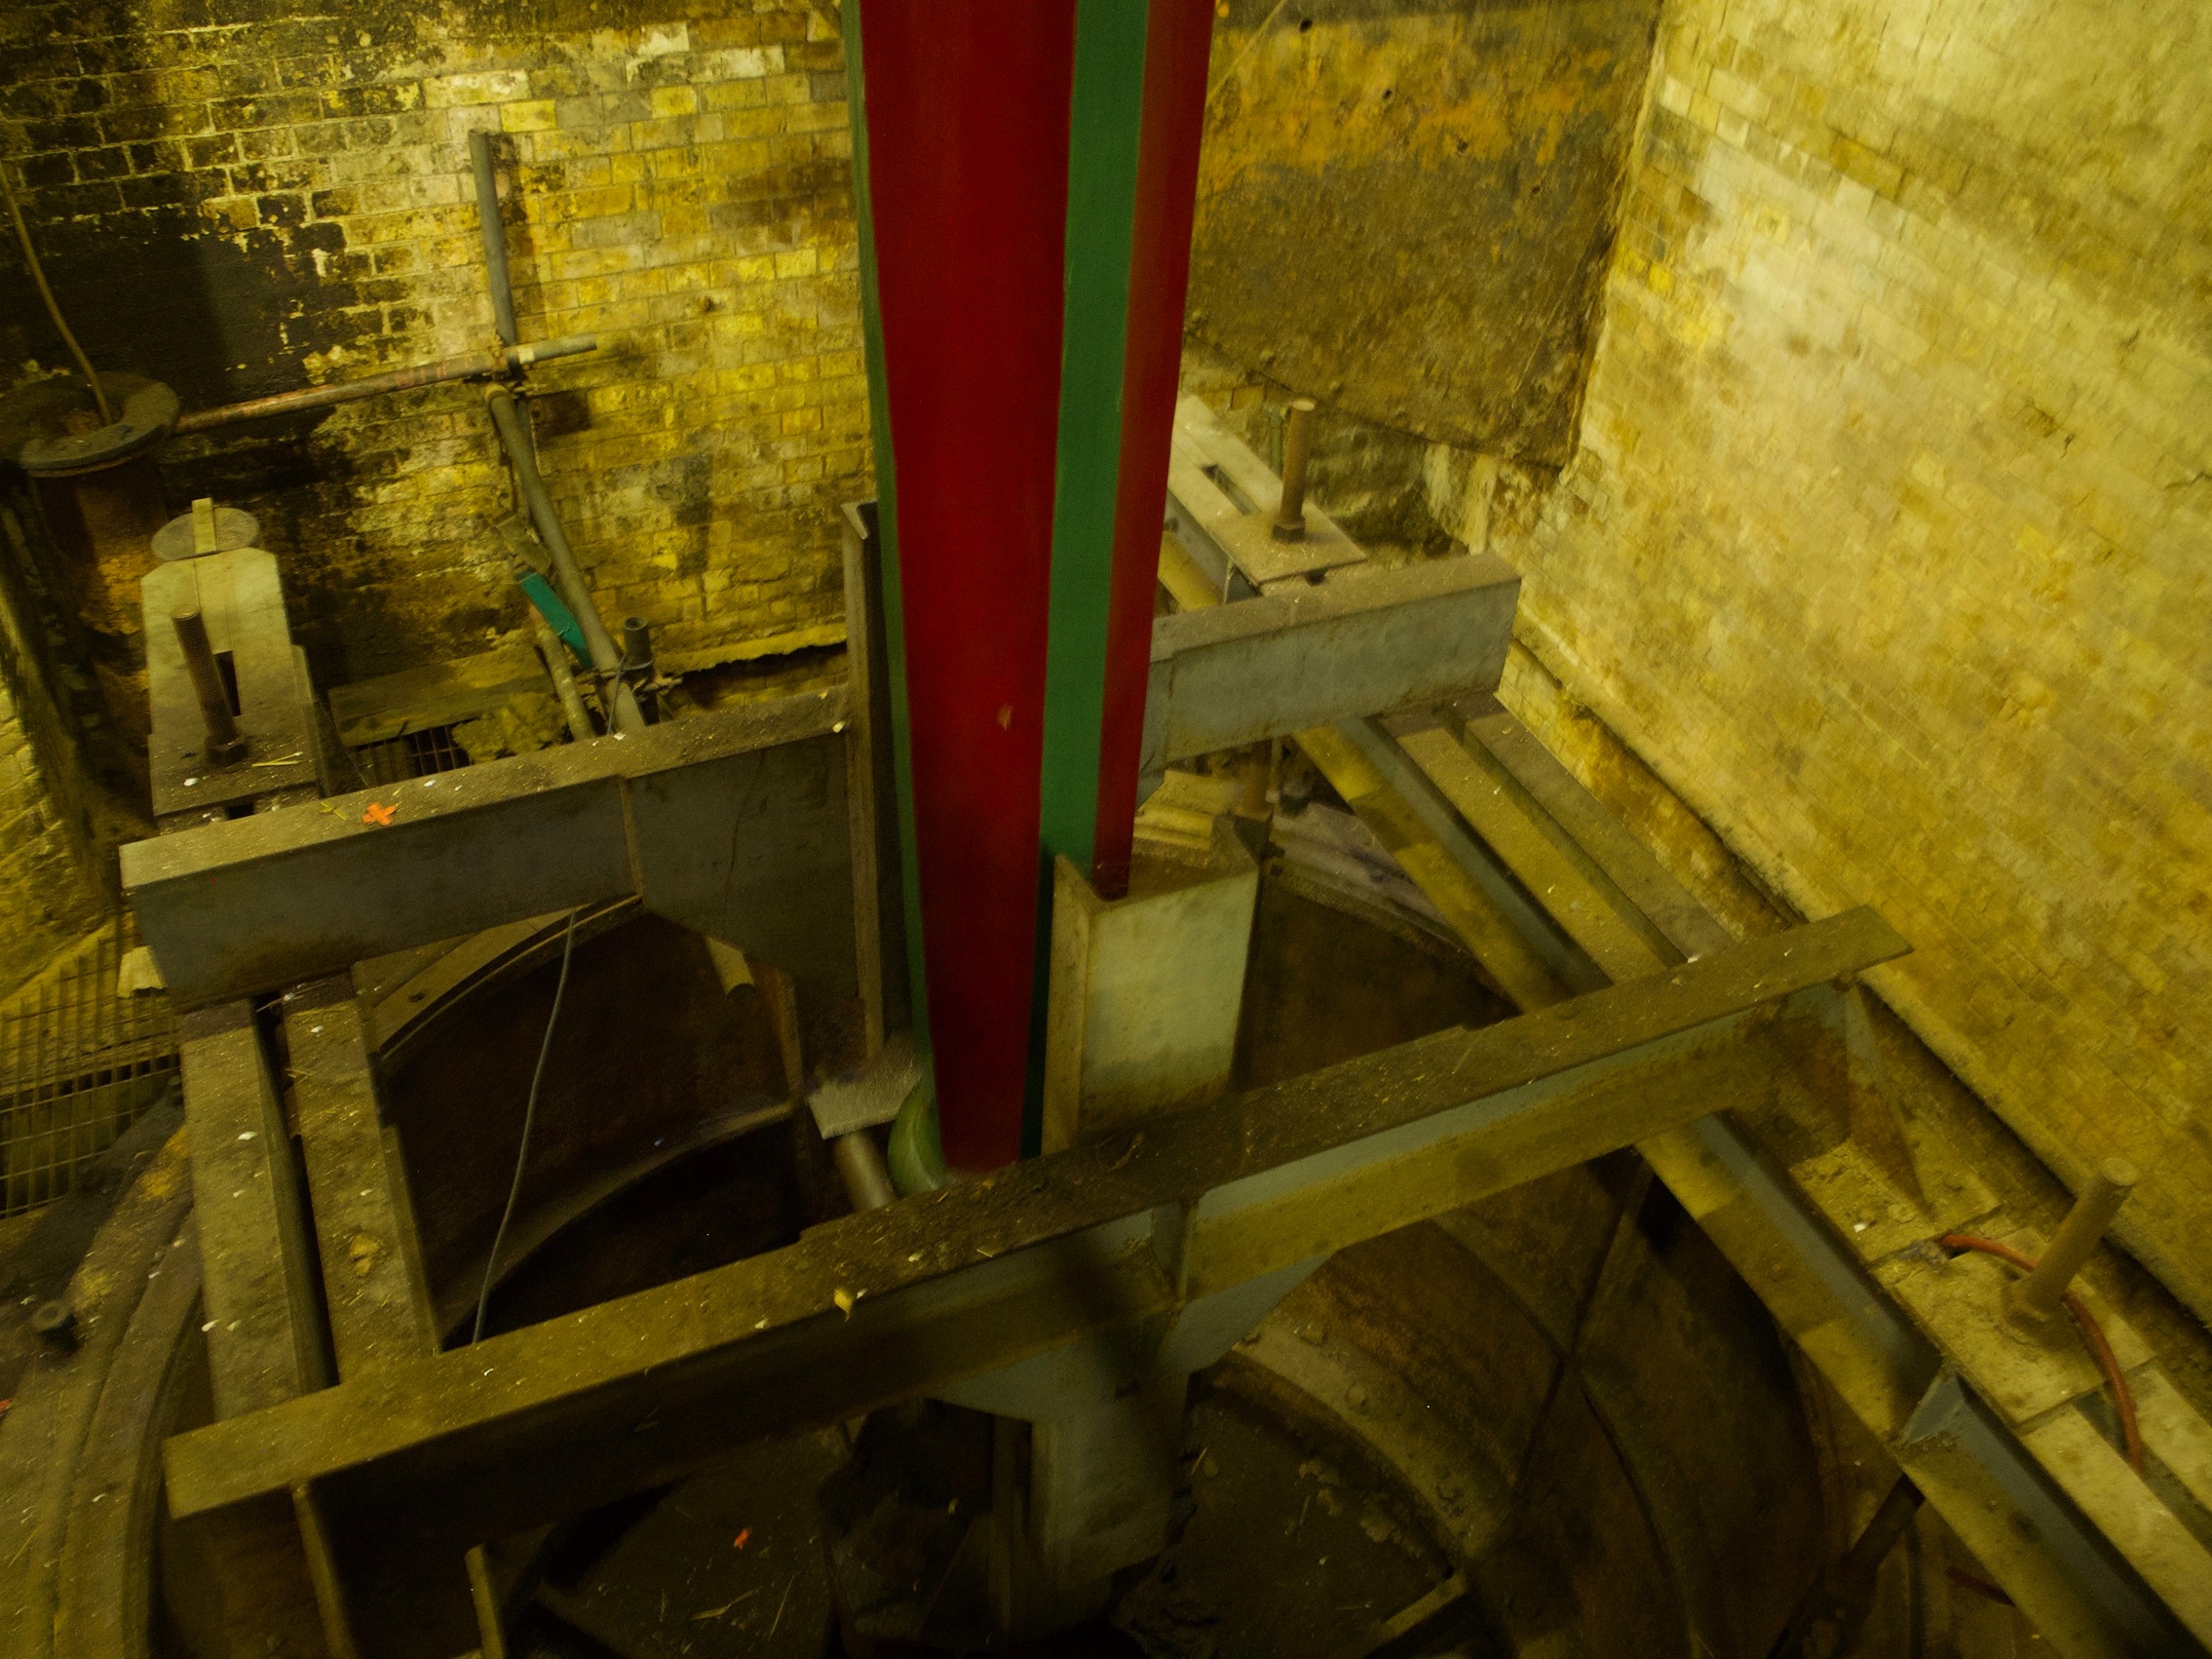 A piston-like machine, with the top painted in red and green.